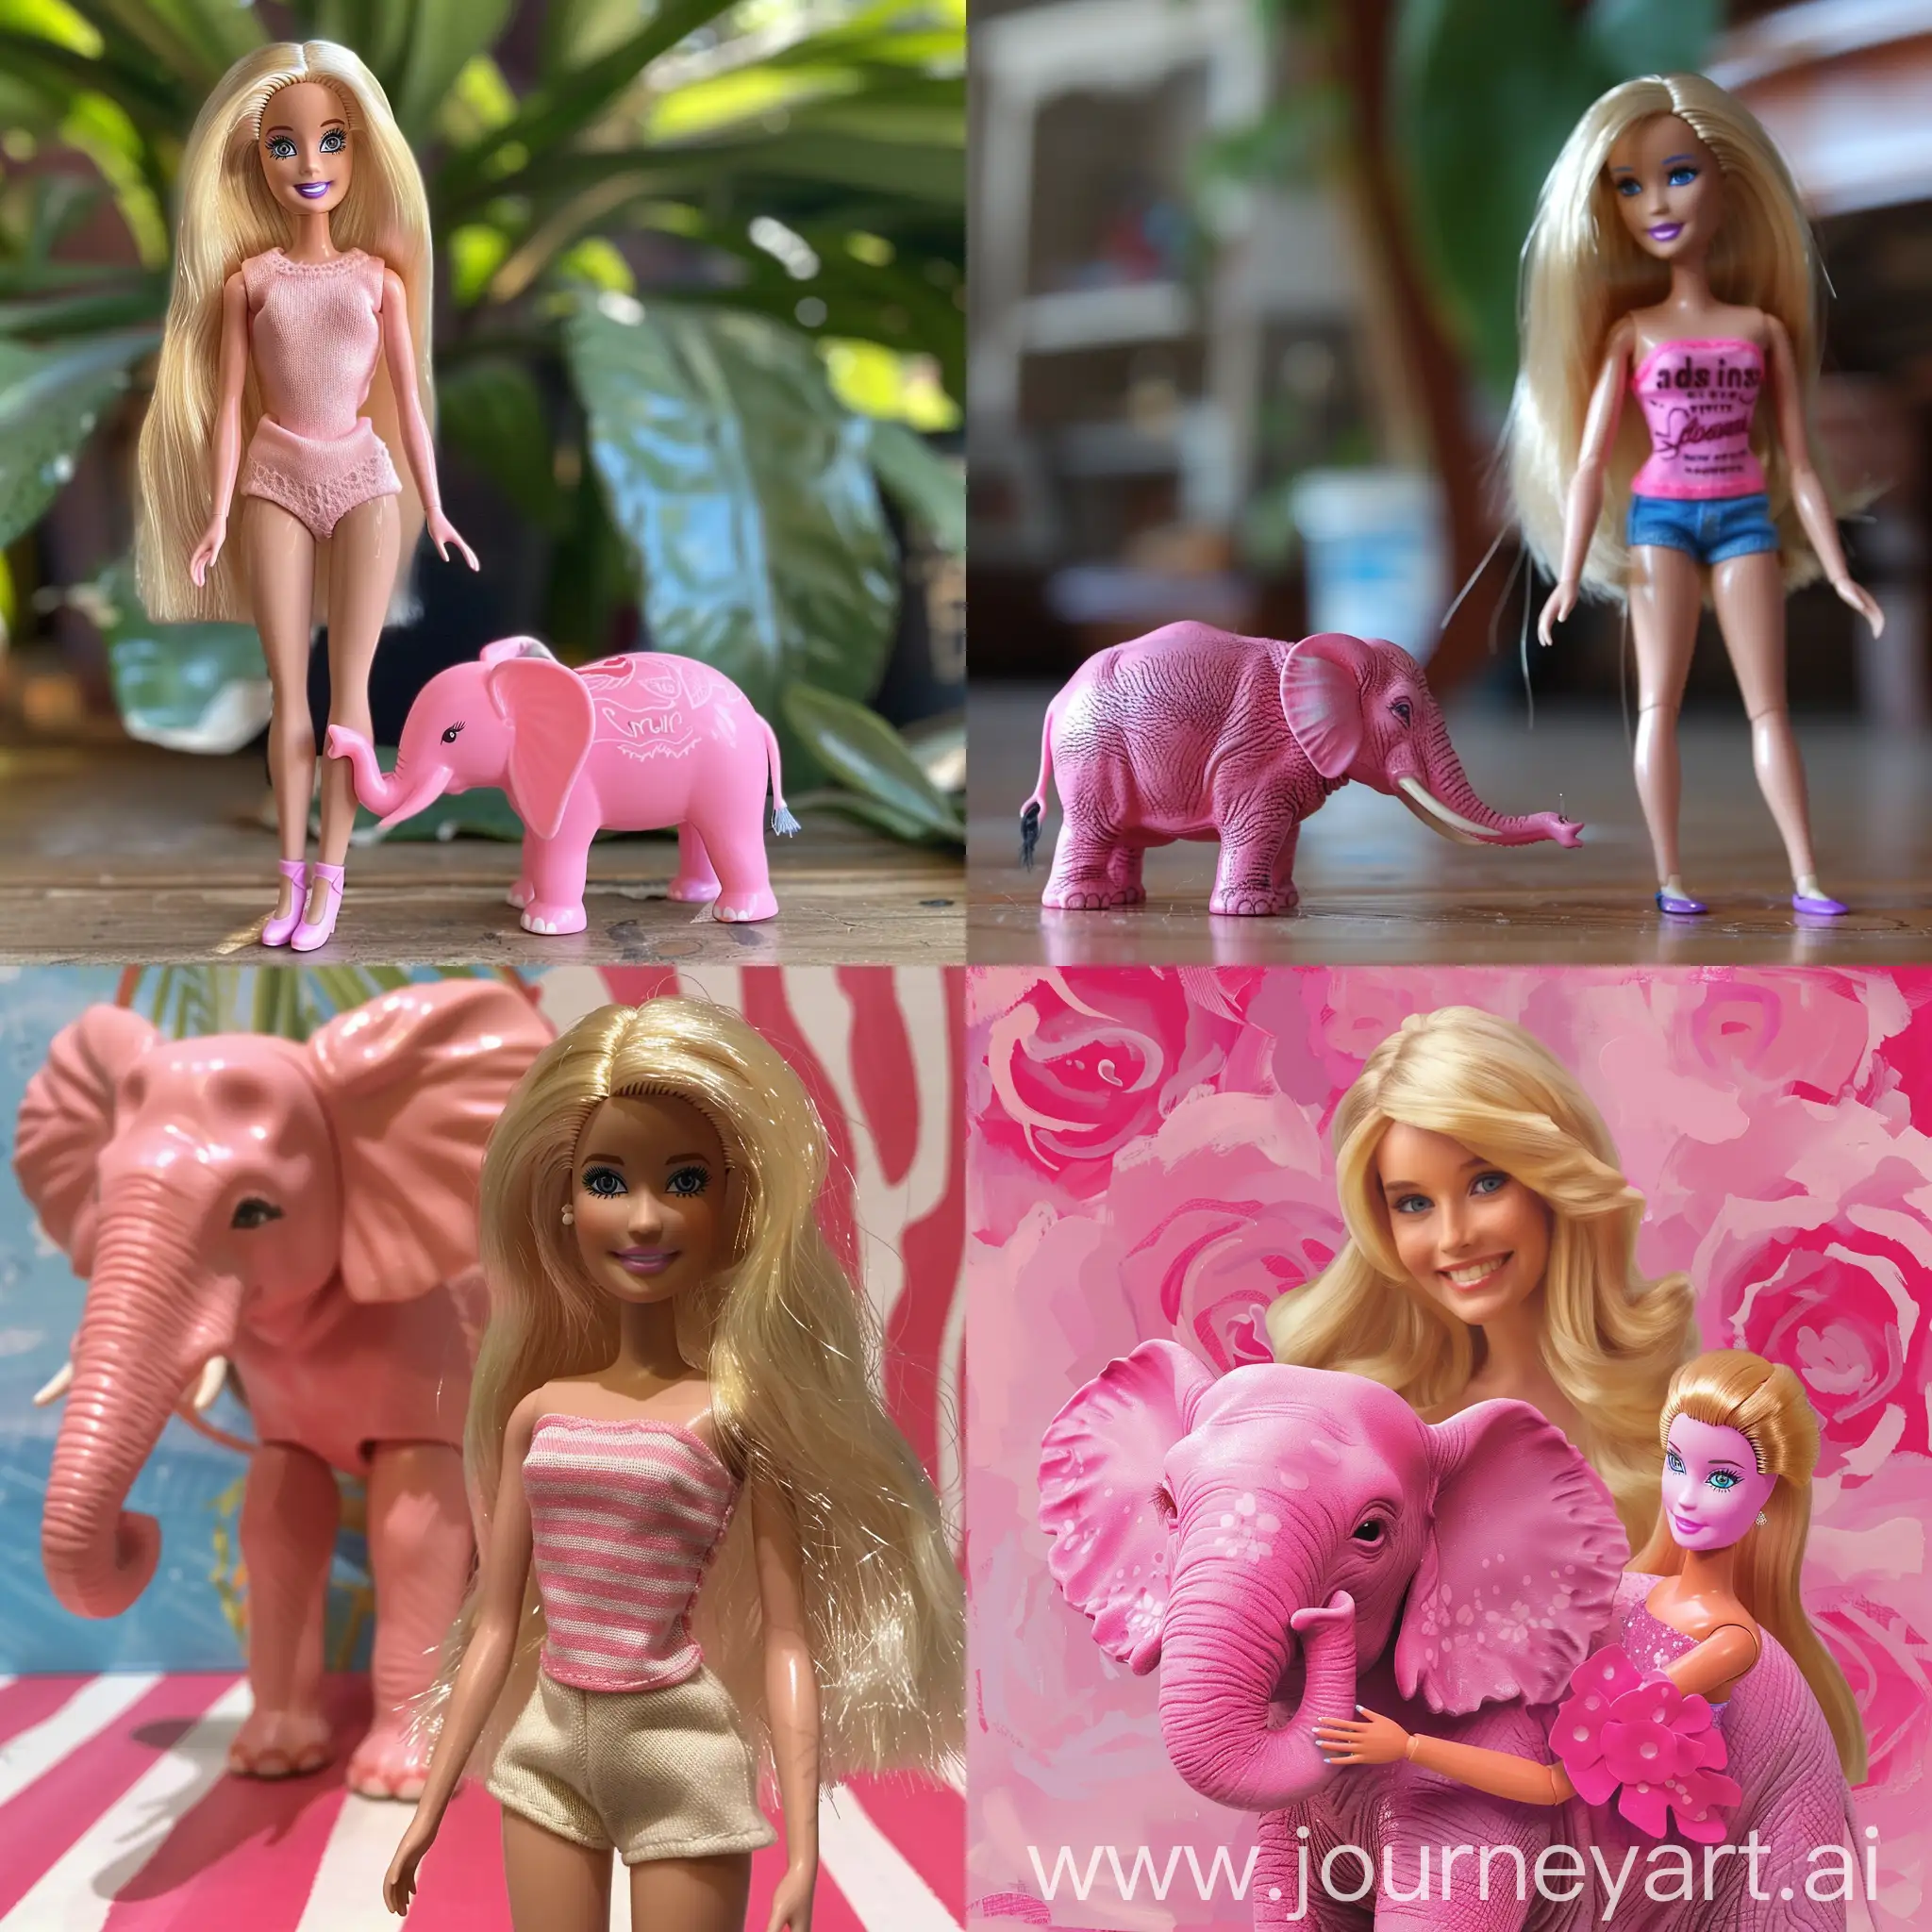 Pink-Elephant-and-Barbie-Dolls-Whimsical-Toy-Friends-in-a-Vibrant-Scene